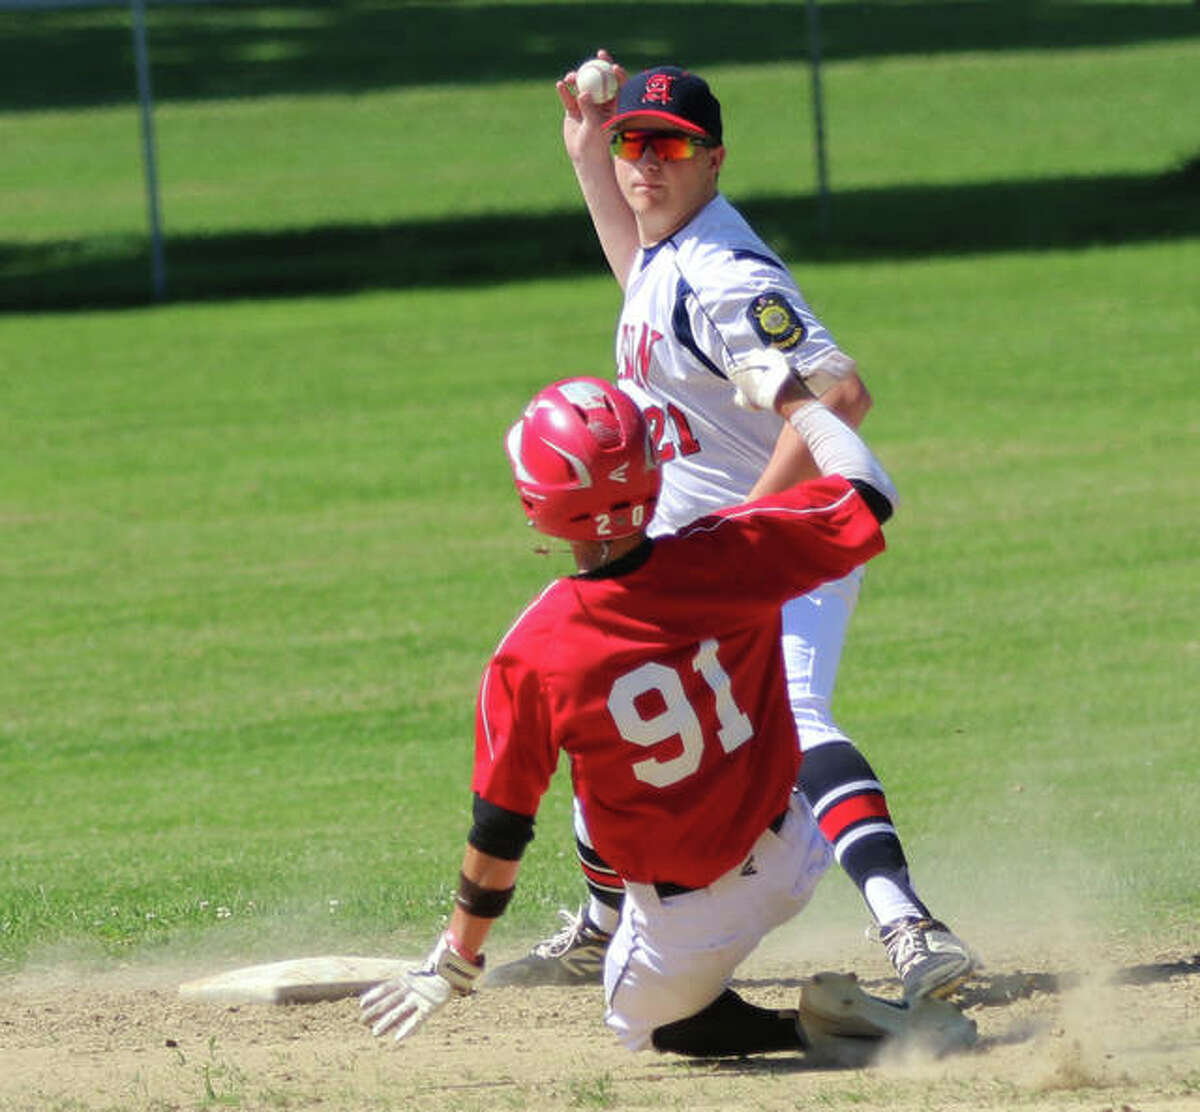 Alton second baseman Gage Booten throws to first base, but cannot complete a double play after getting the force on Highland’s Landyn Oestringer (91) at second on Sunday at P.I.C. Park in Pierron.